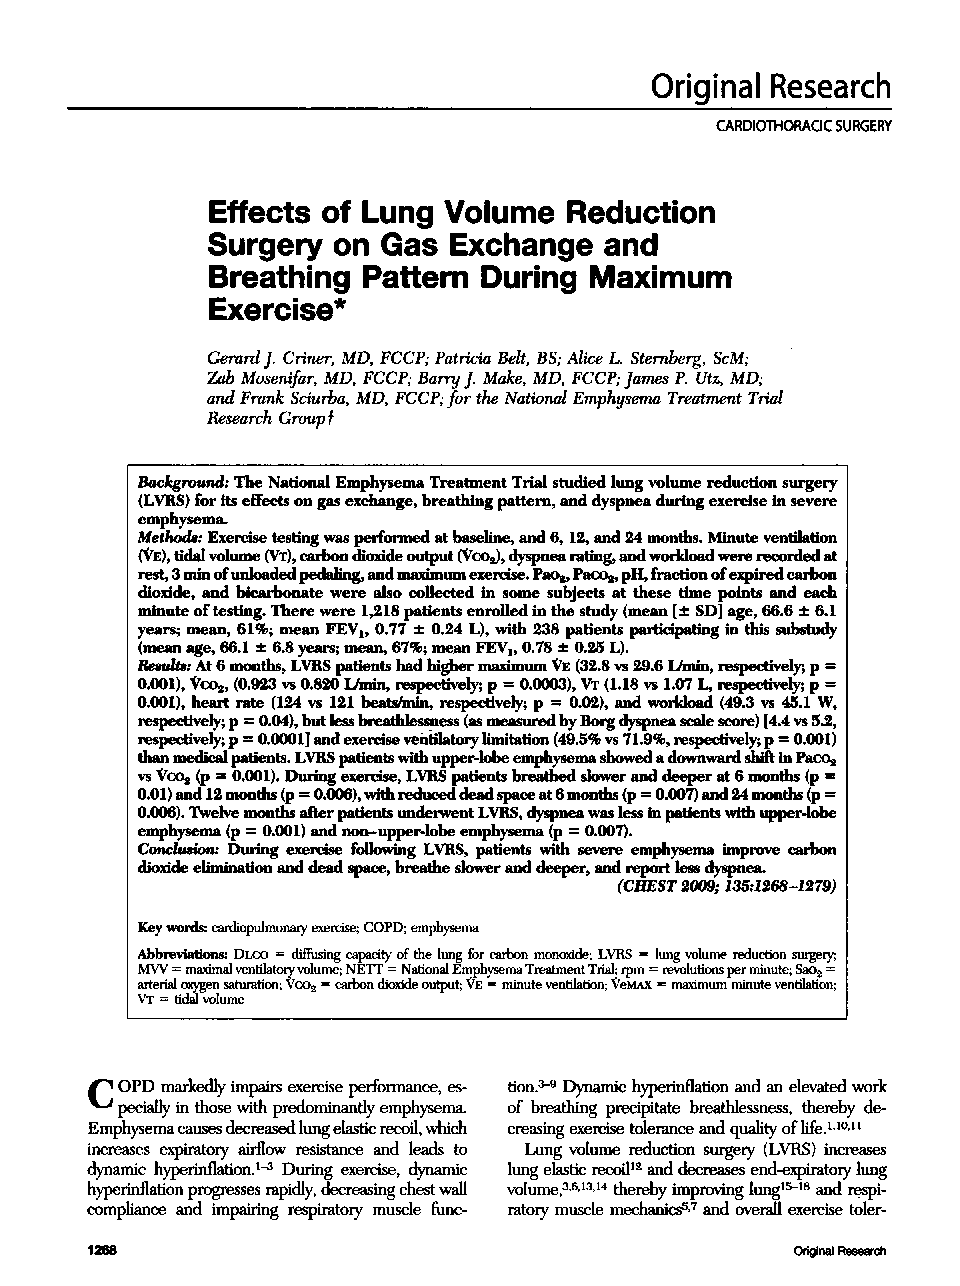 Effects of Lung Volume Reduction Surgery on Gas Exchange and Breathing Pattern During Maximum Exercise